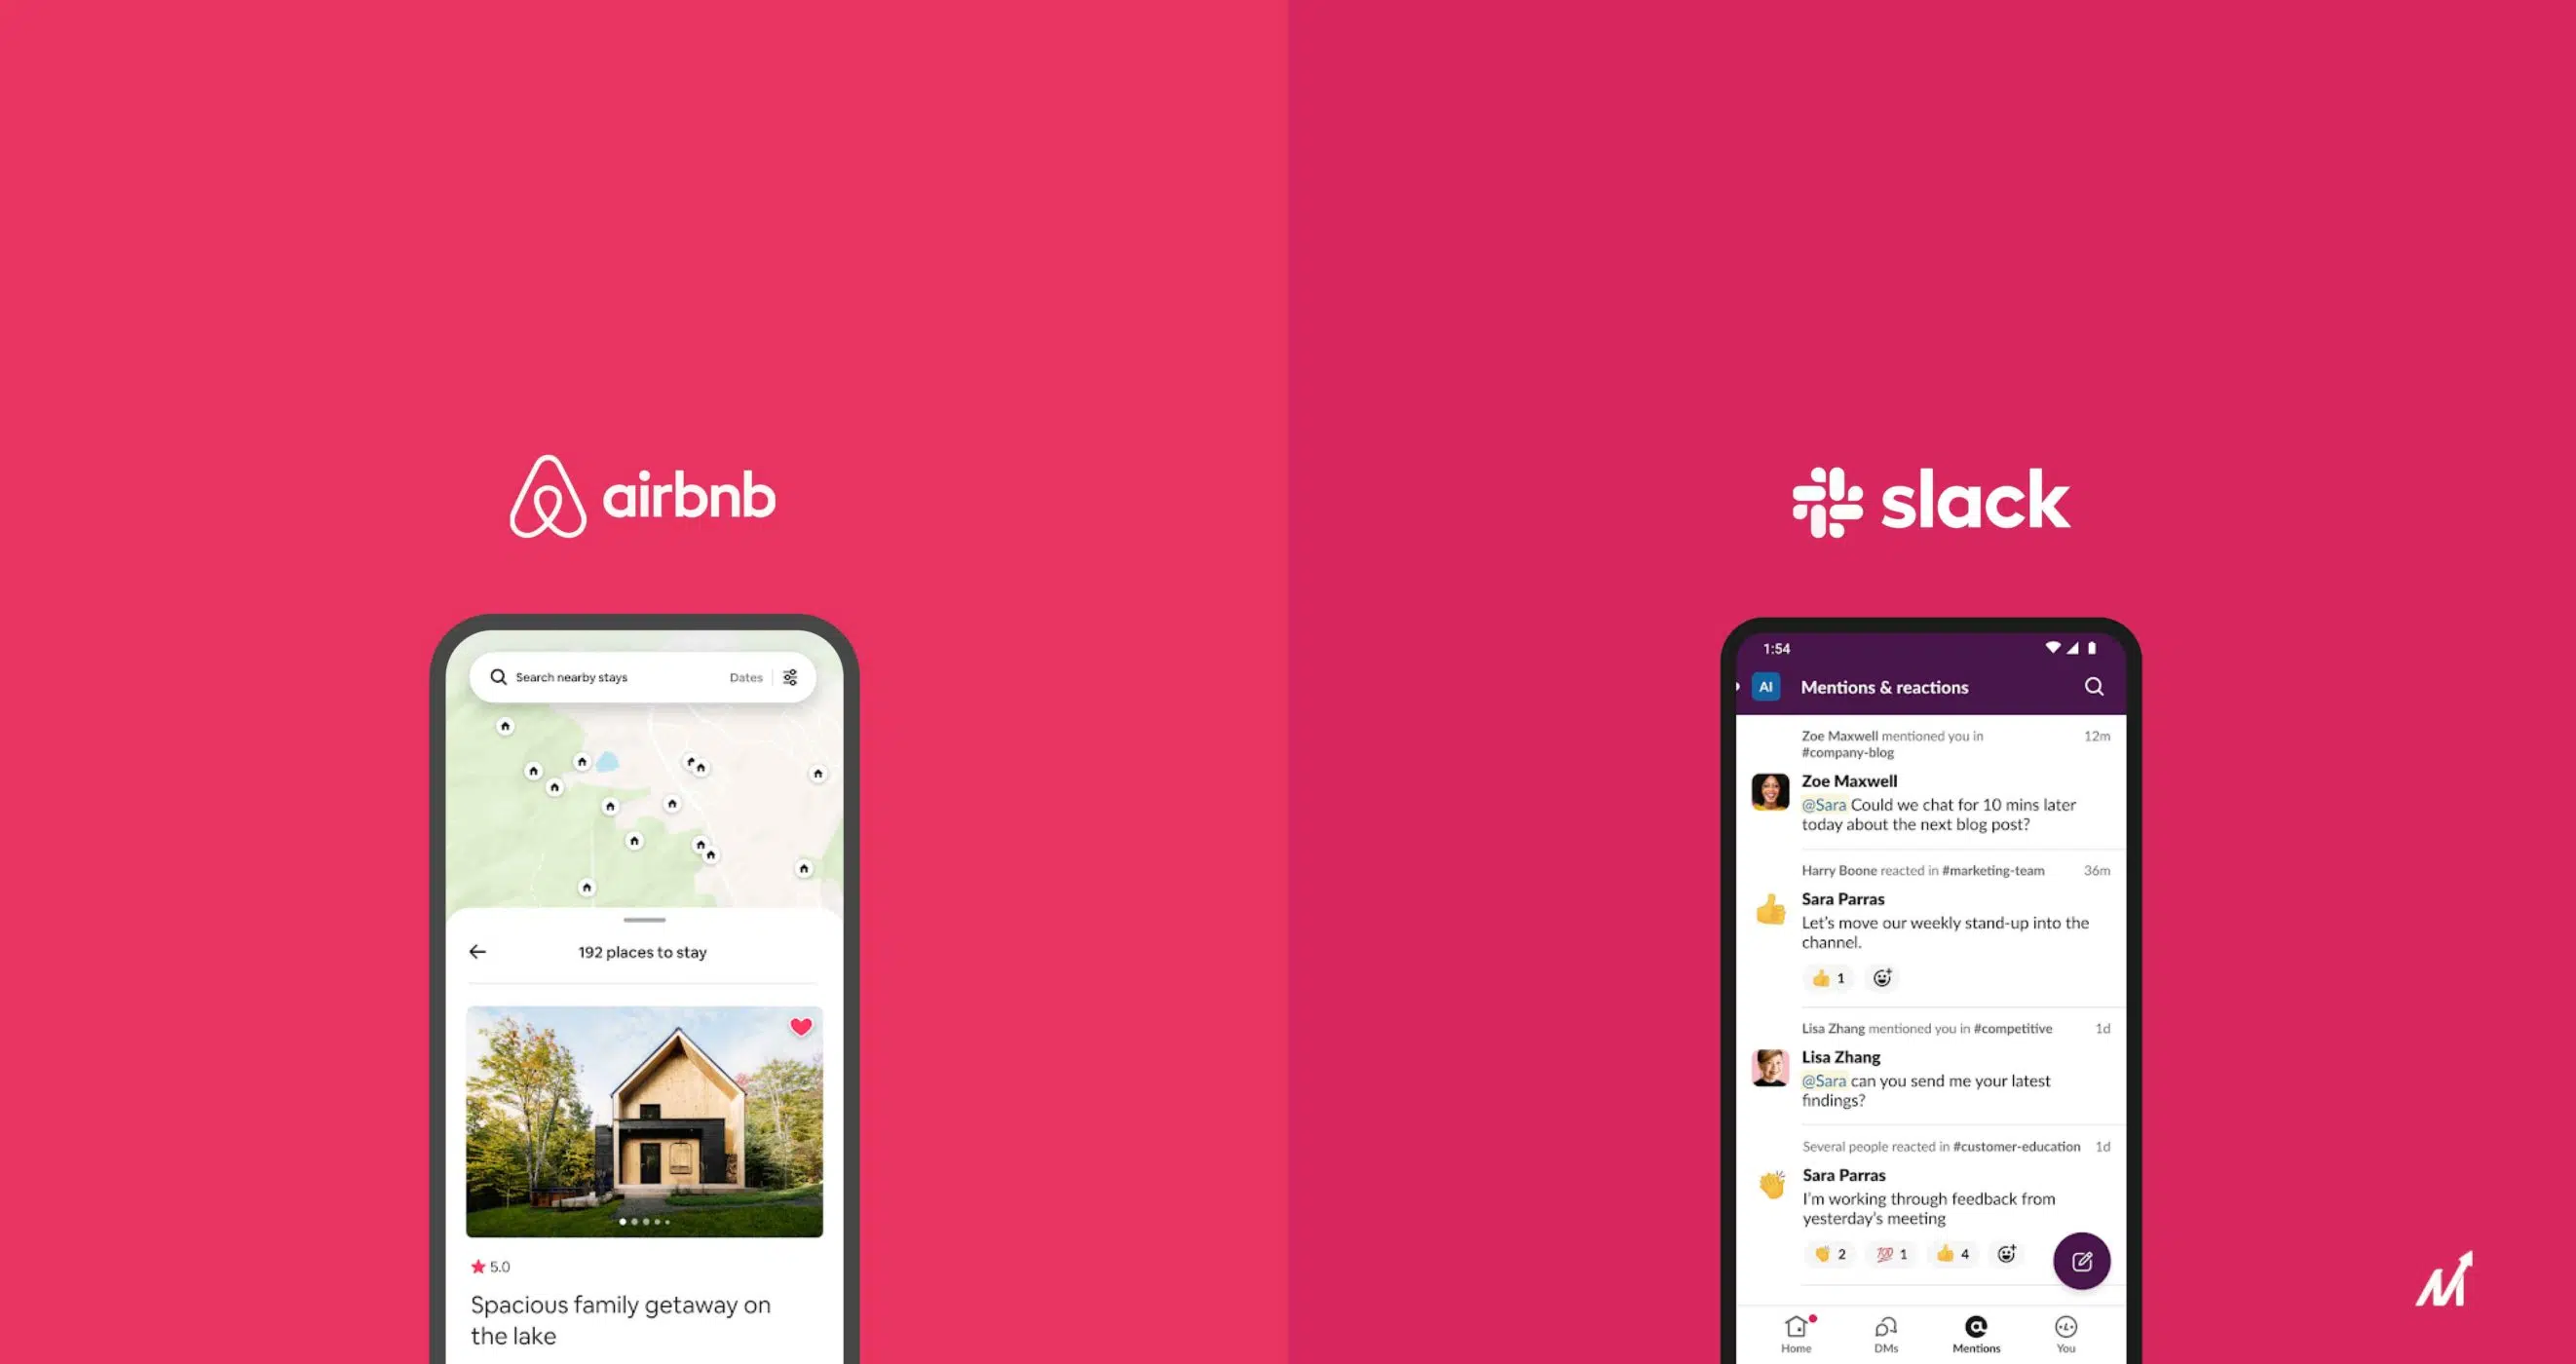 How To Develop Apps Like Airbnb And Slack?